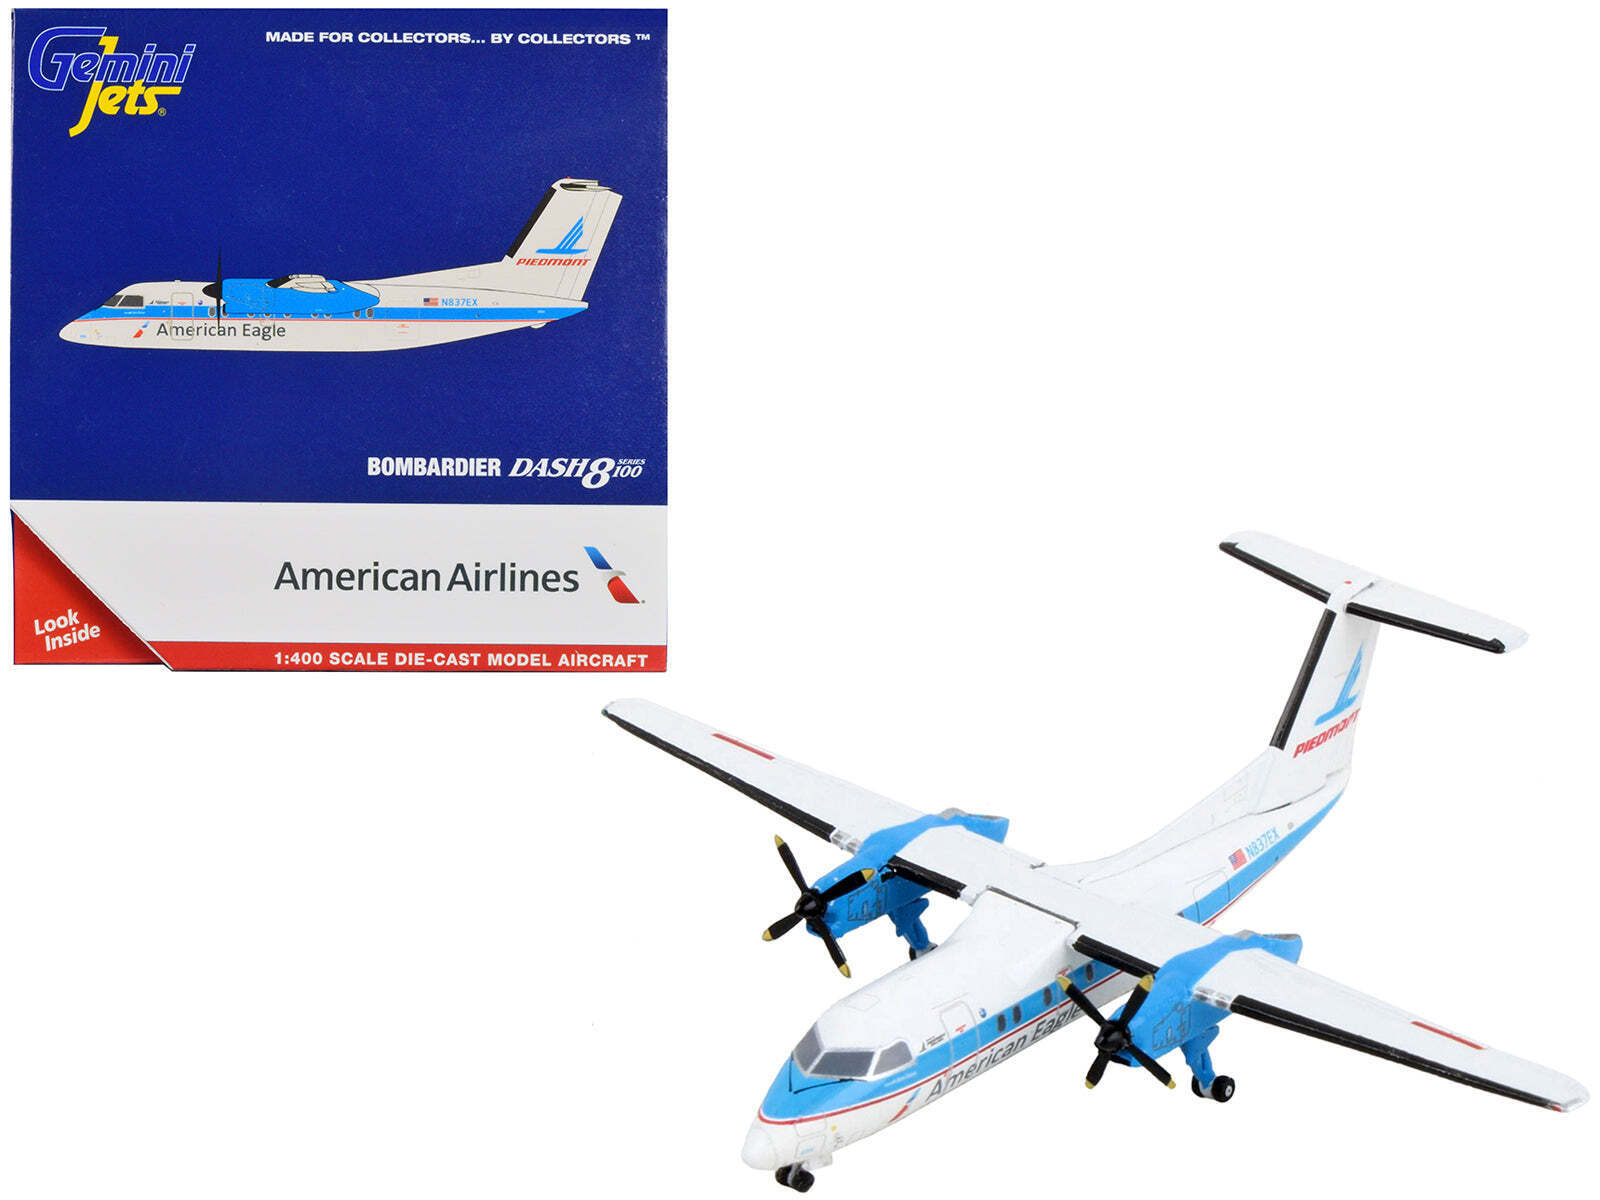 Bombardier Dash -100 Commercial Airlines - Eagle 1/400 Diecast Model Airplane